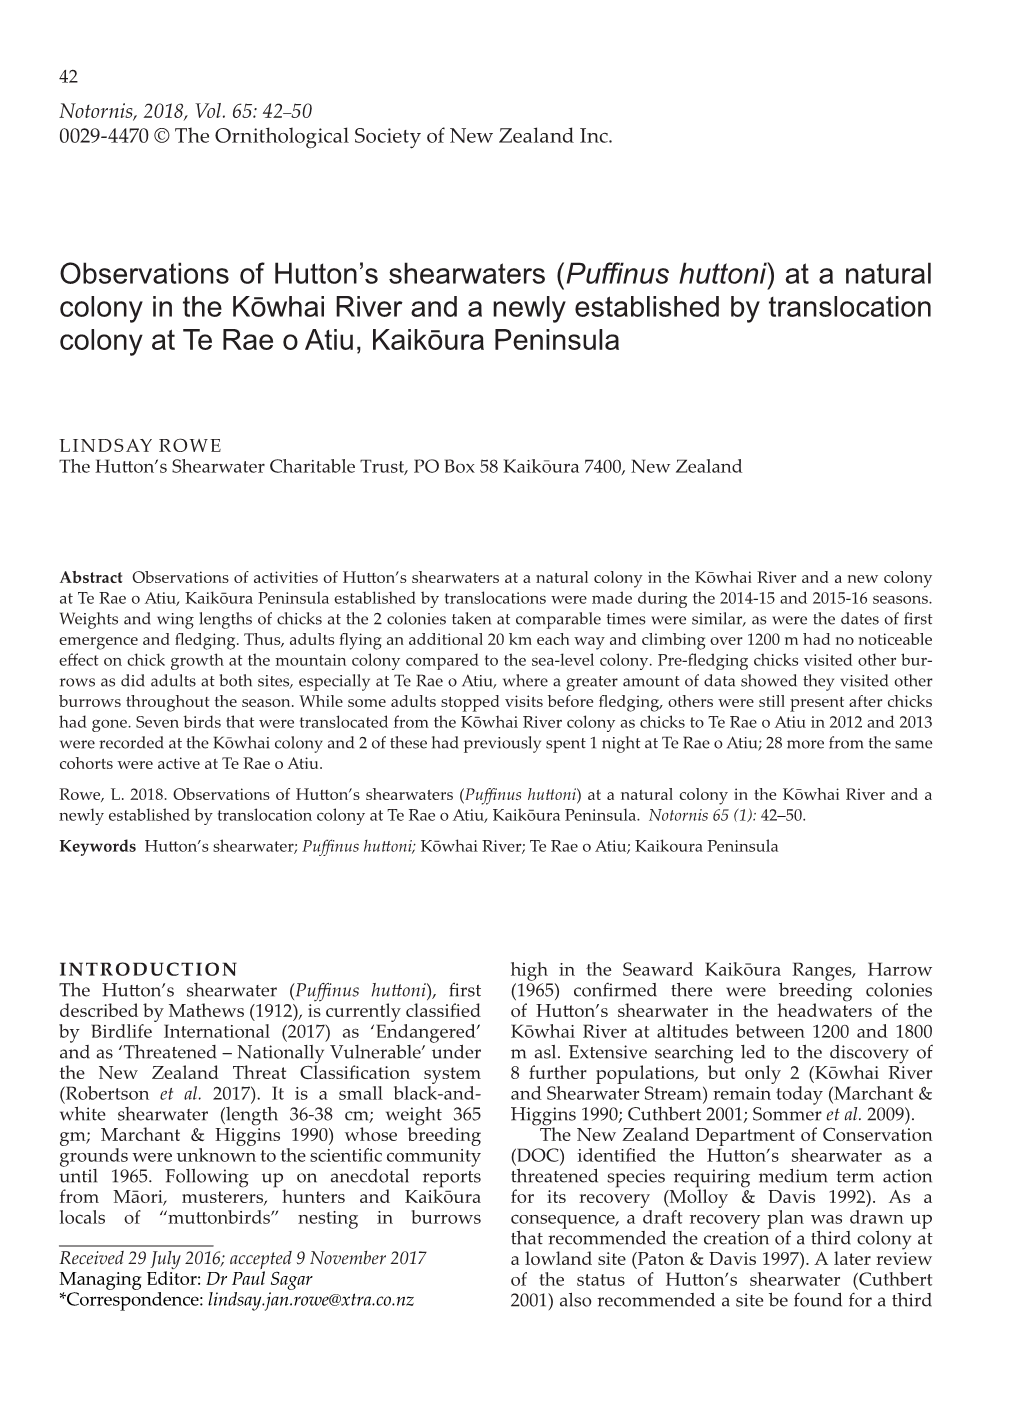 Observations of Hutton's Shearwaters (Puffinus Huttoni) at a Natural Colony